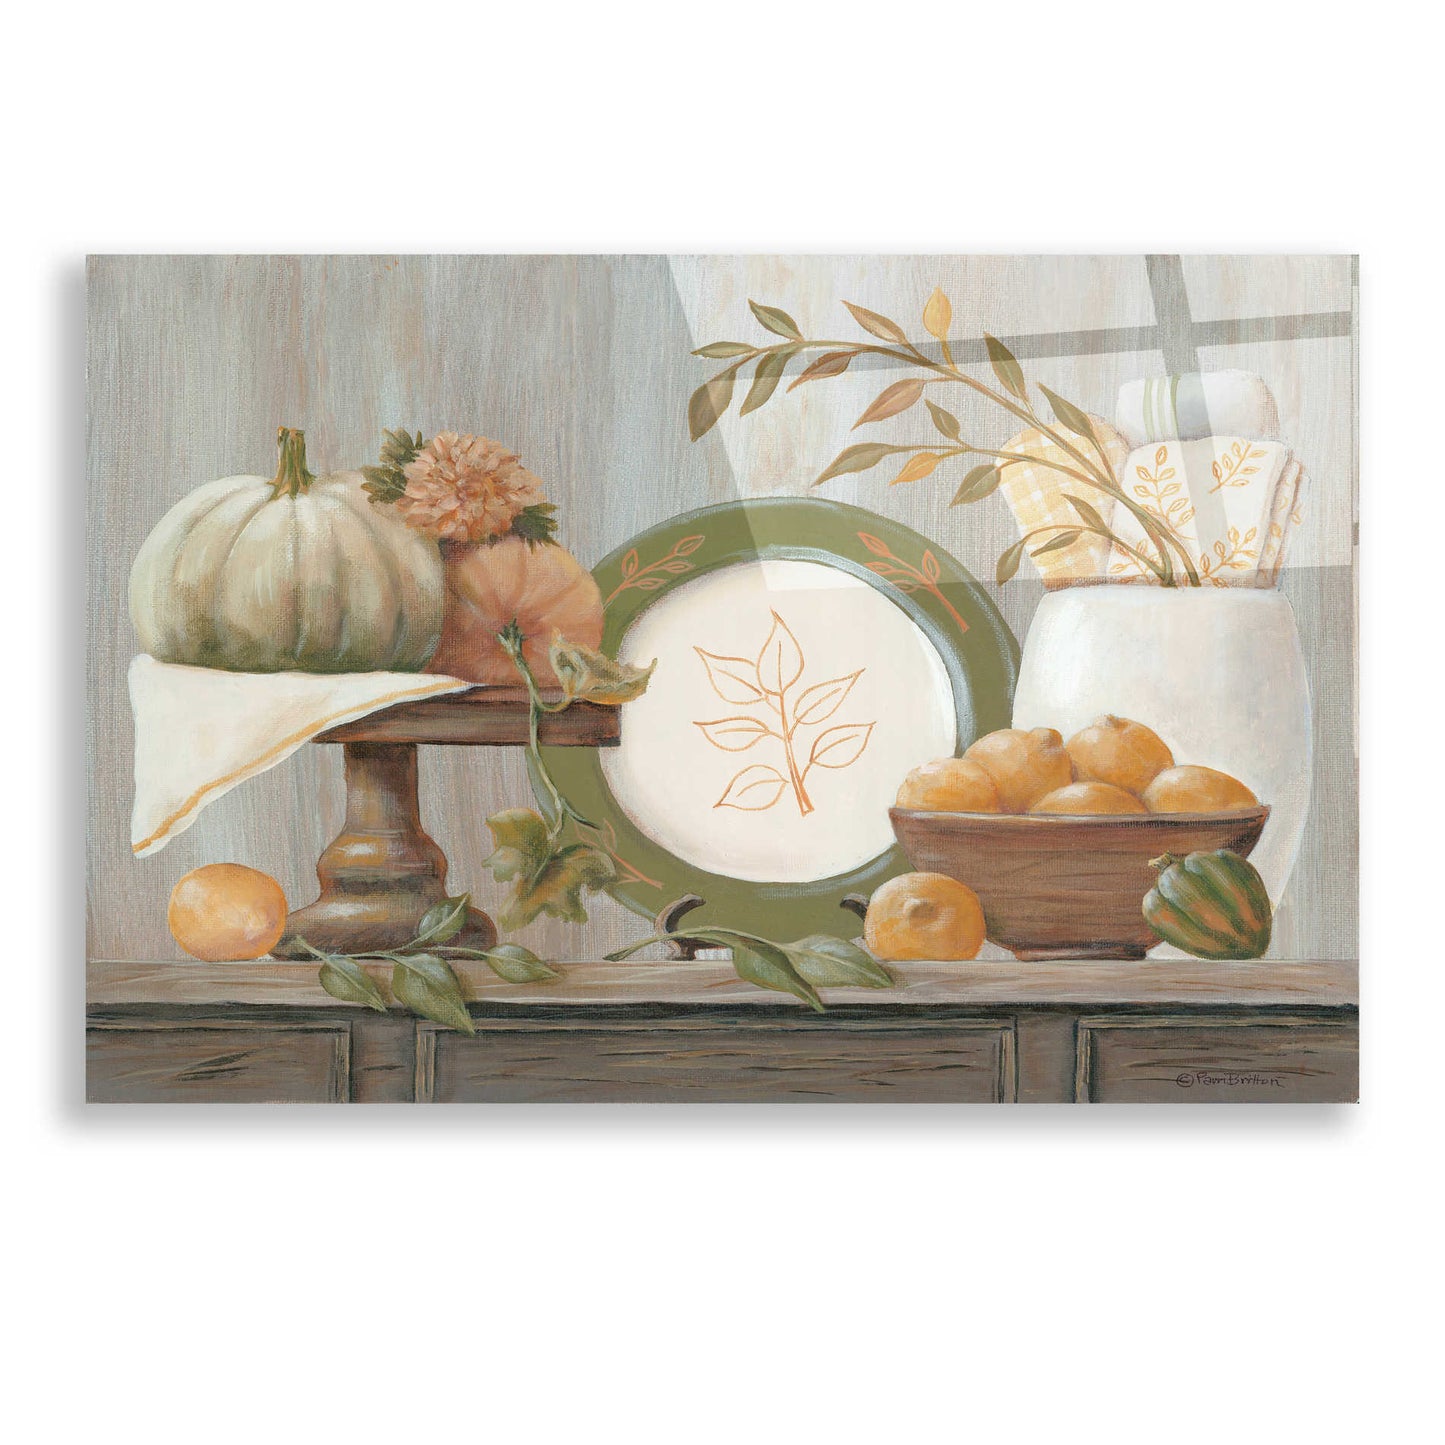 Epic Art 'A Harvest Kitchen' by Pam Britton, Acrylic Glass Wall Art,24x16